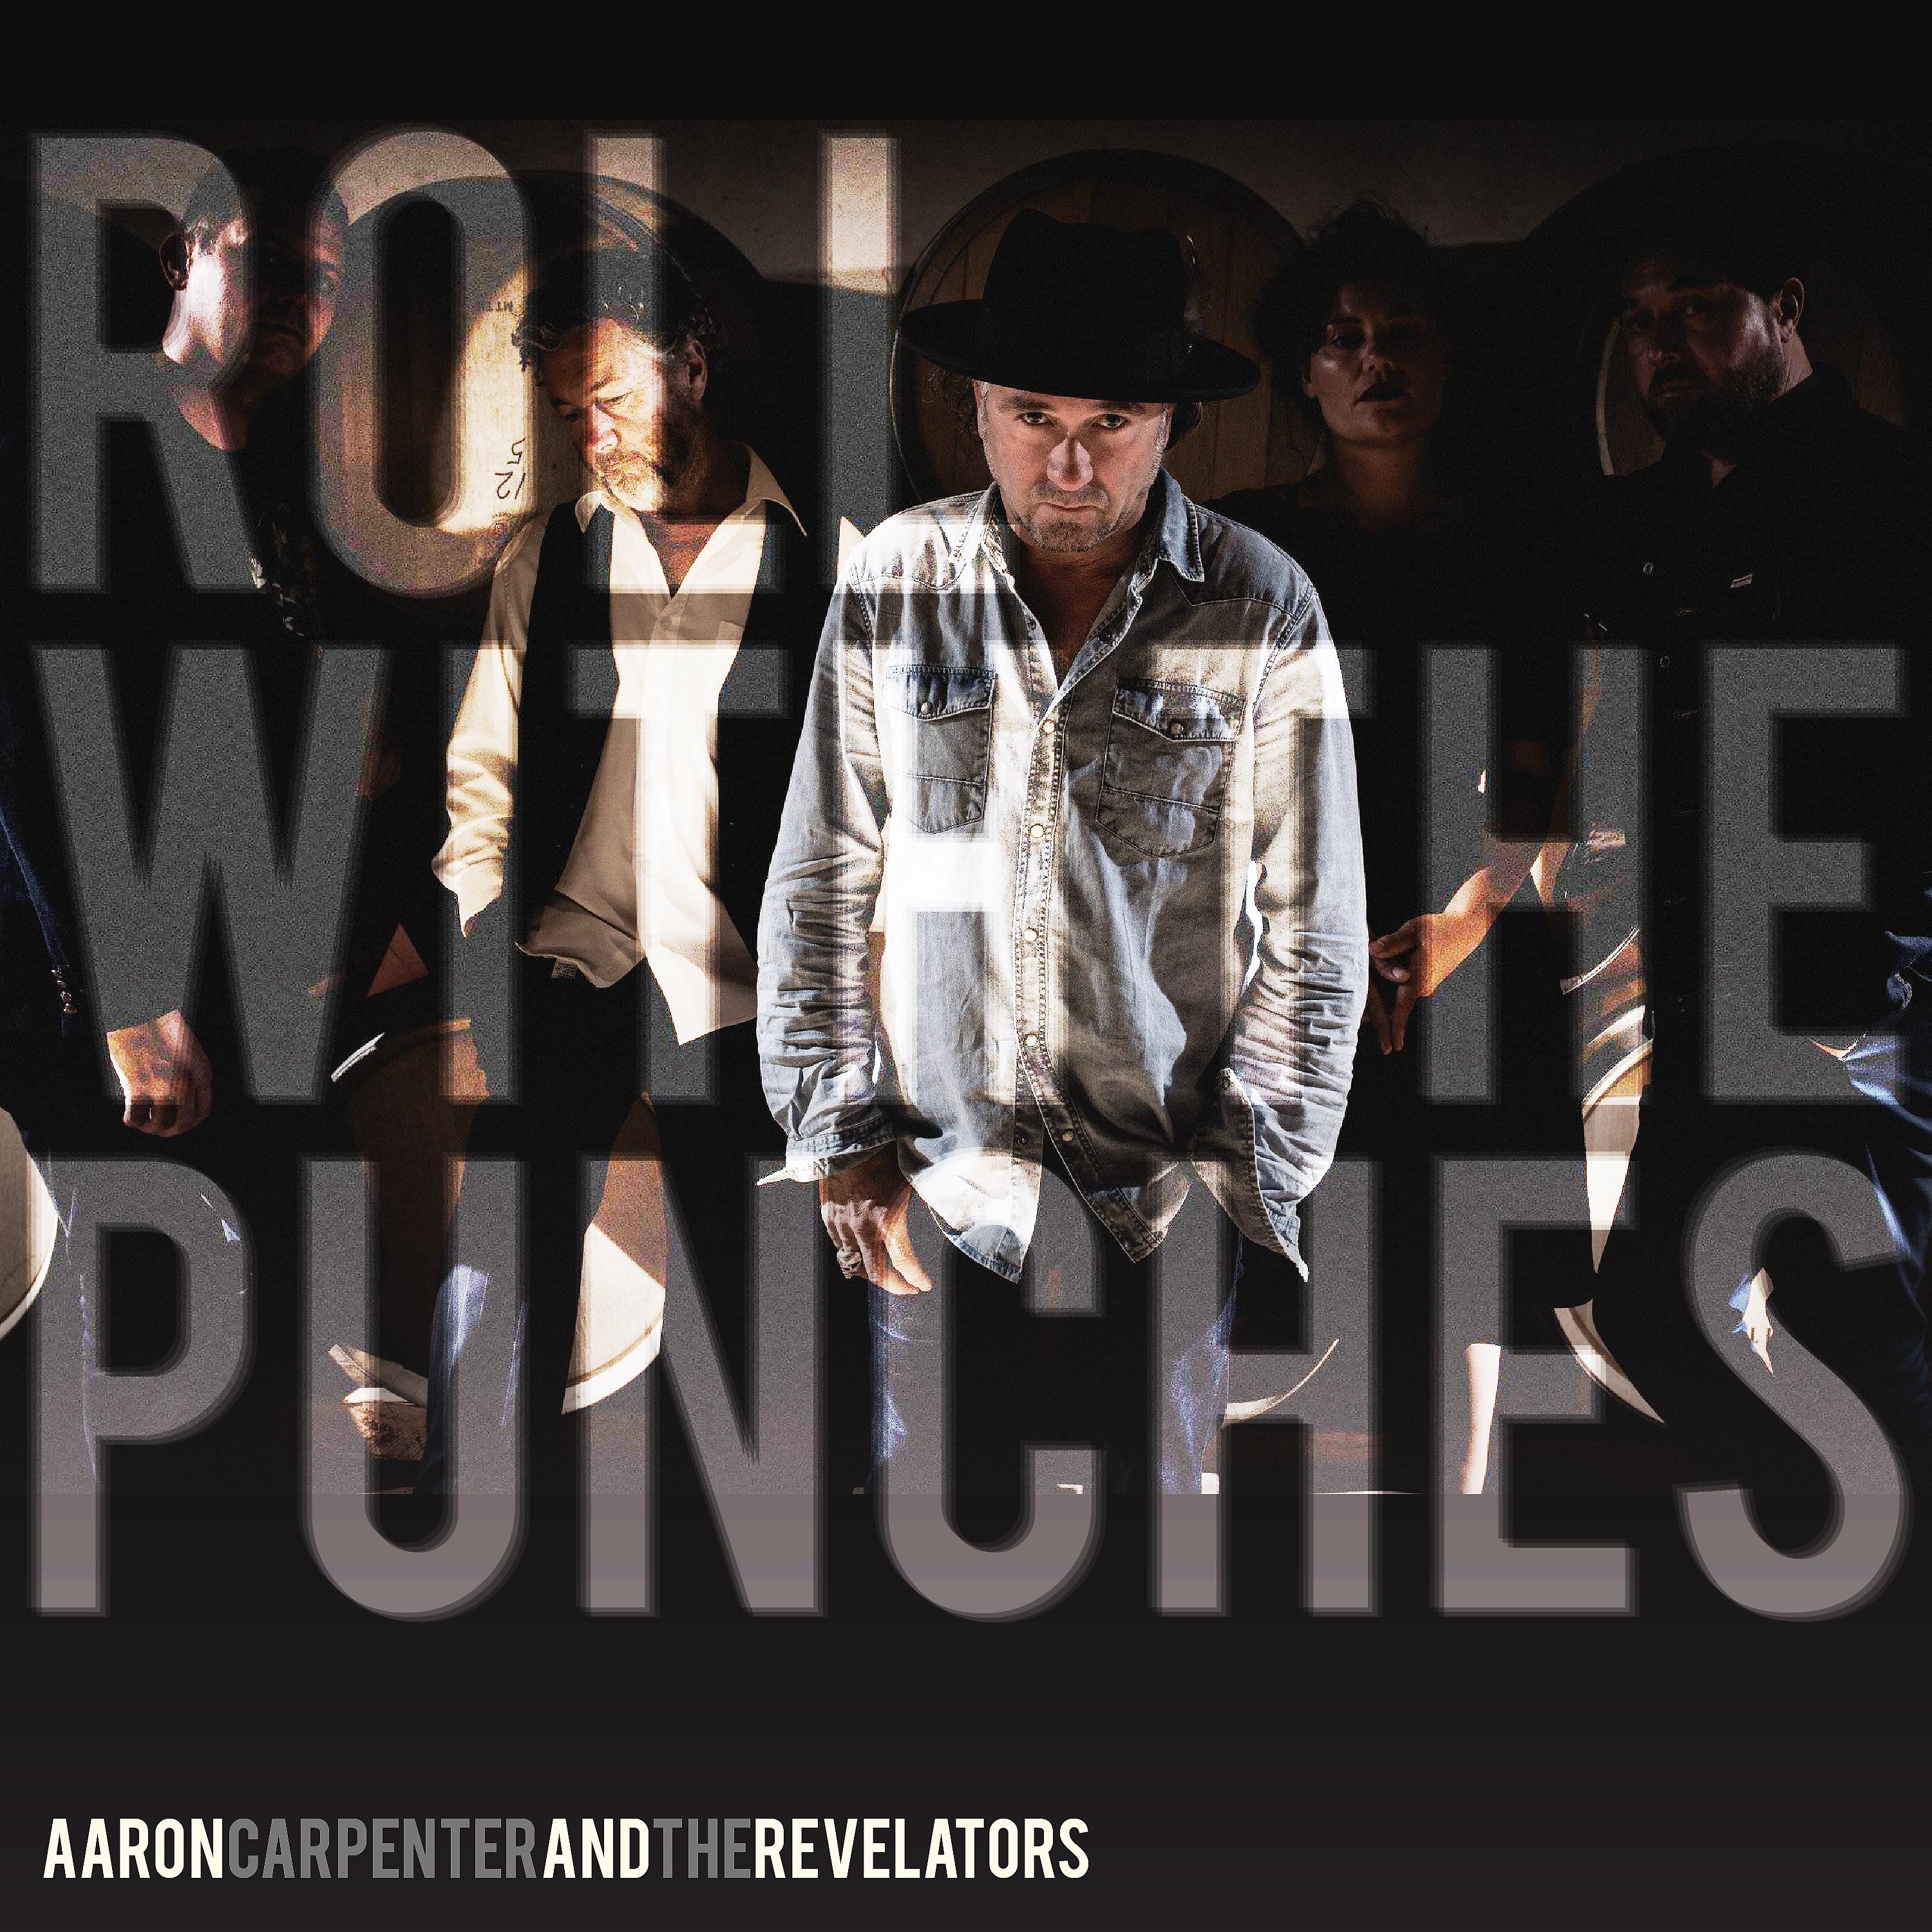 Постер альбома Roll with the Punches